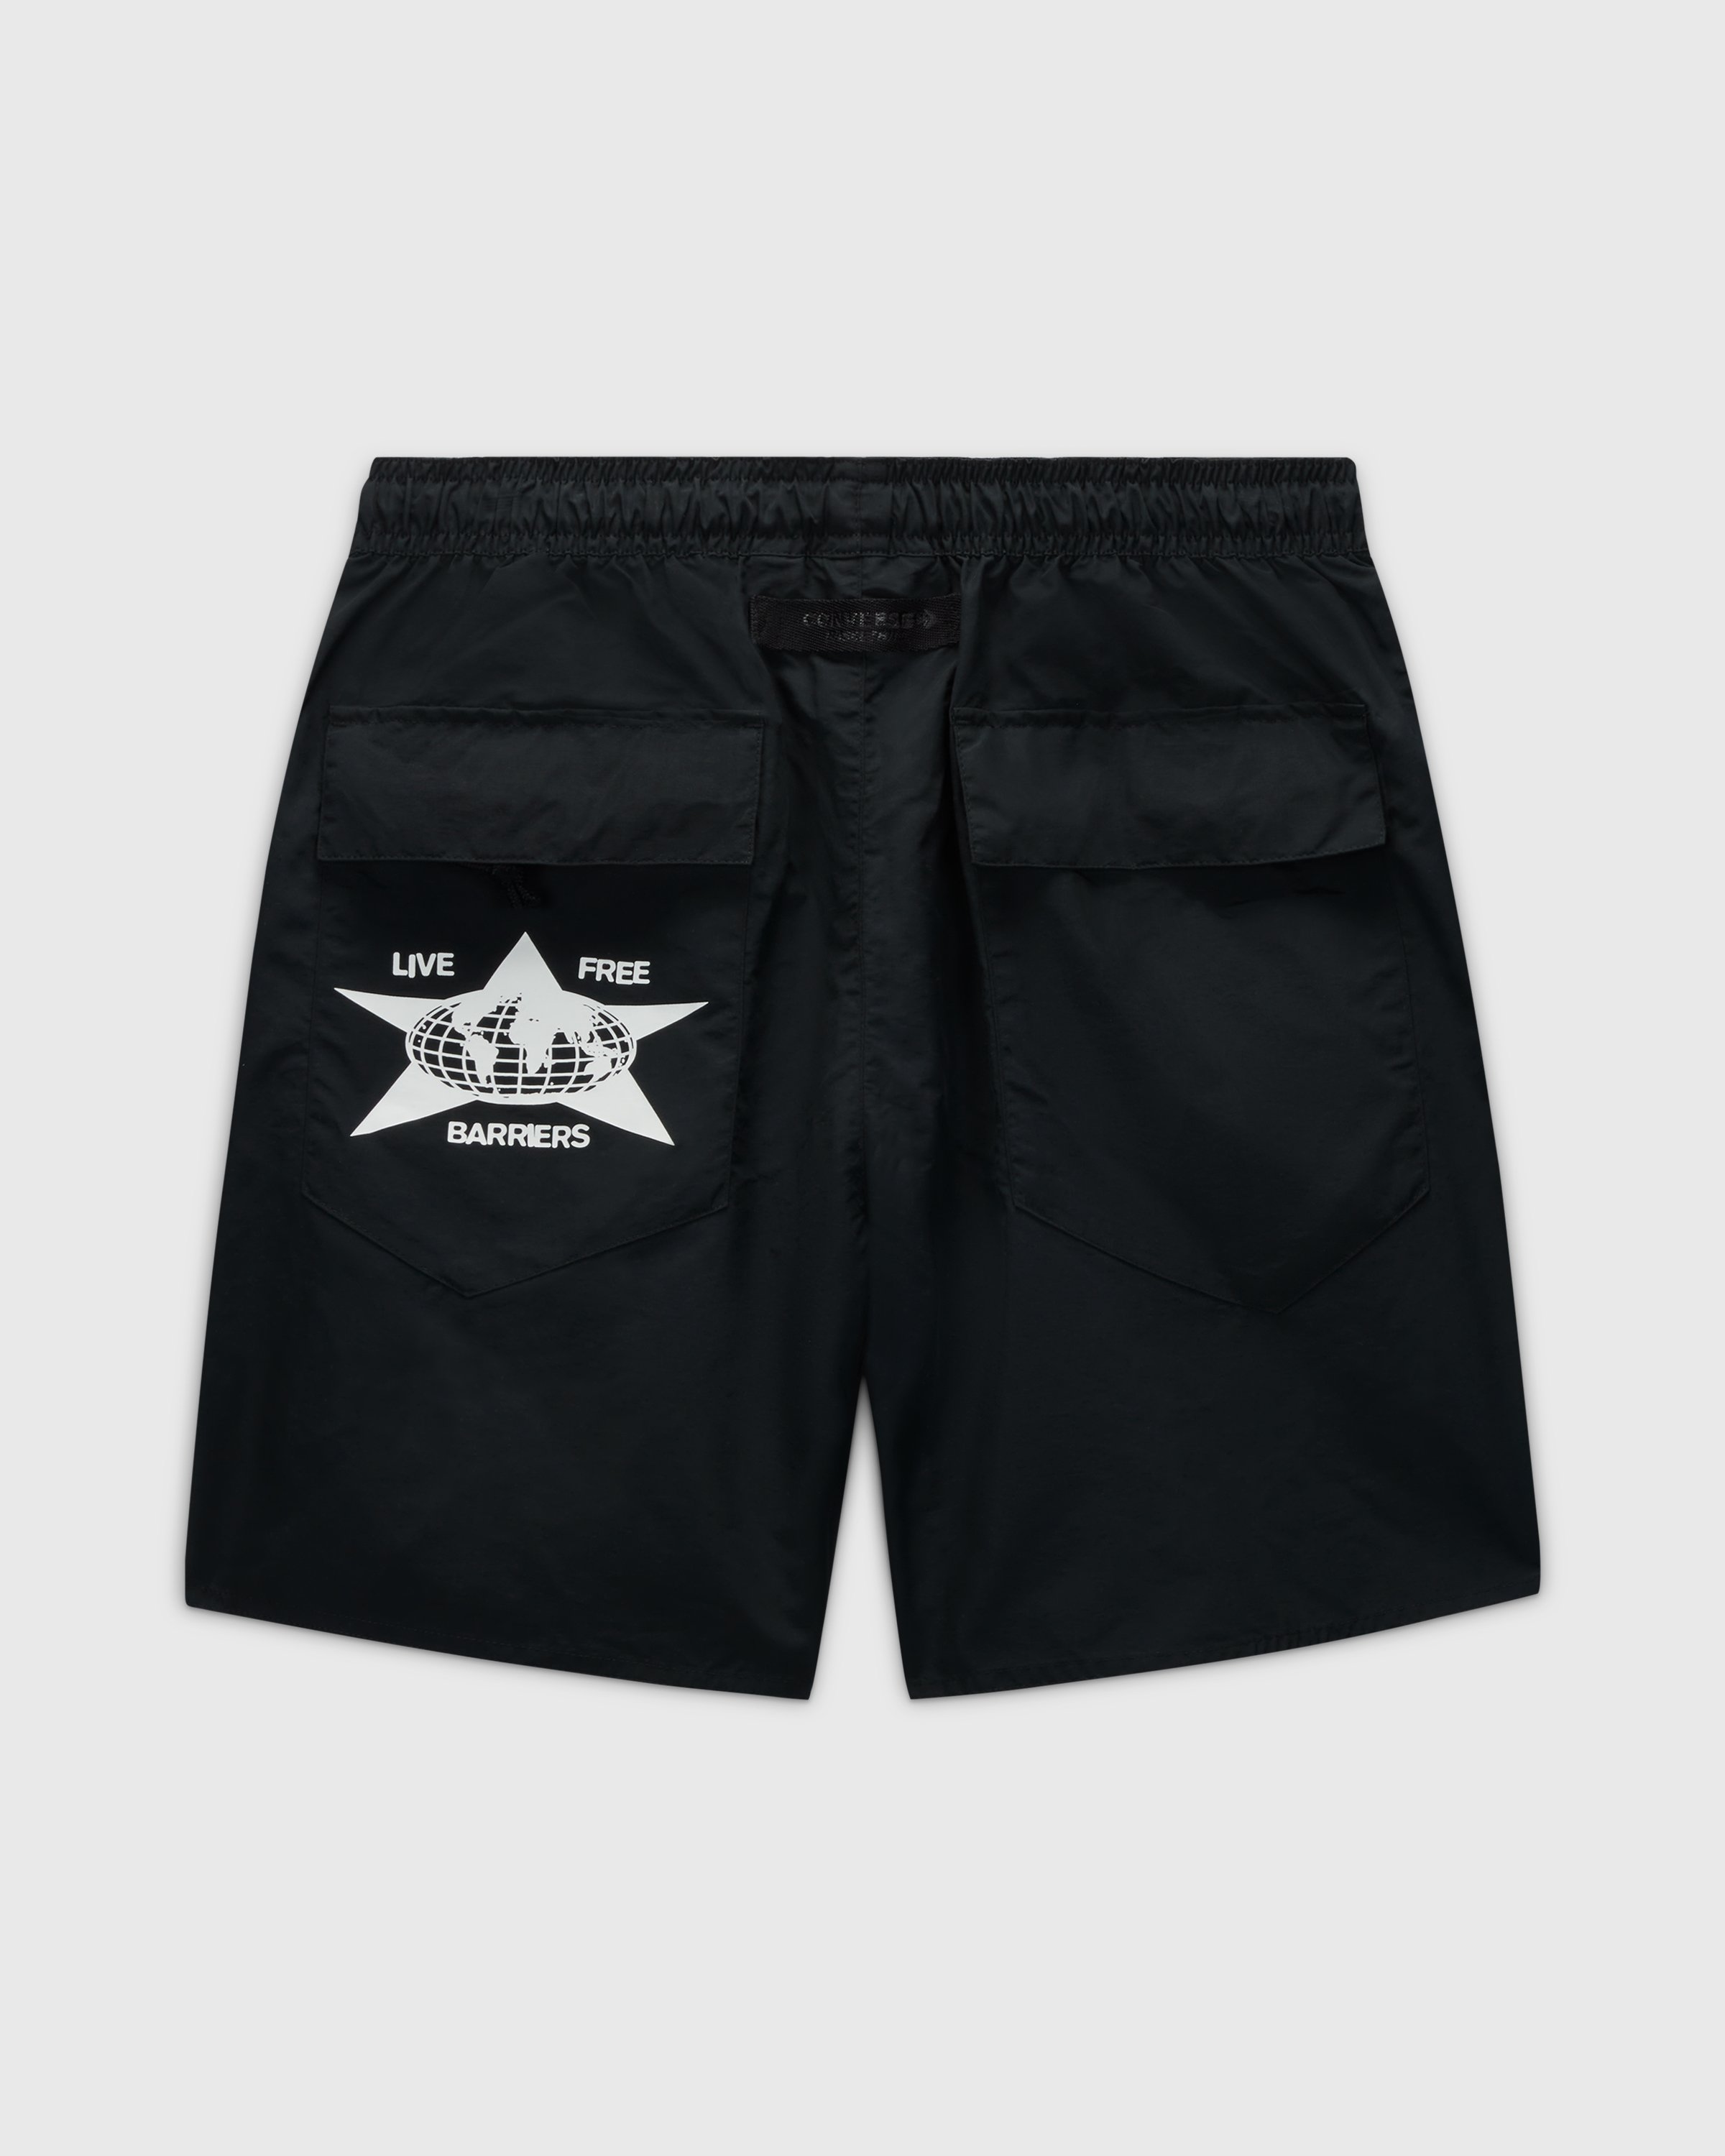 Converse x Barriers - Court Ready Cutter Shorts Black - Clothing - Black - Image 2